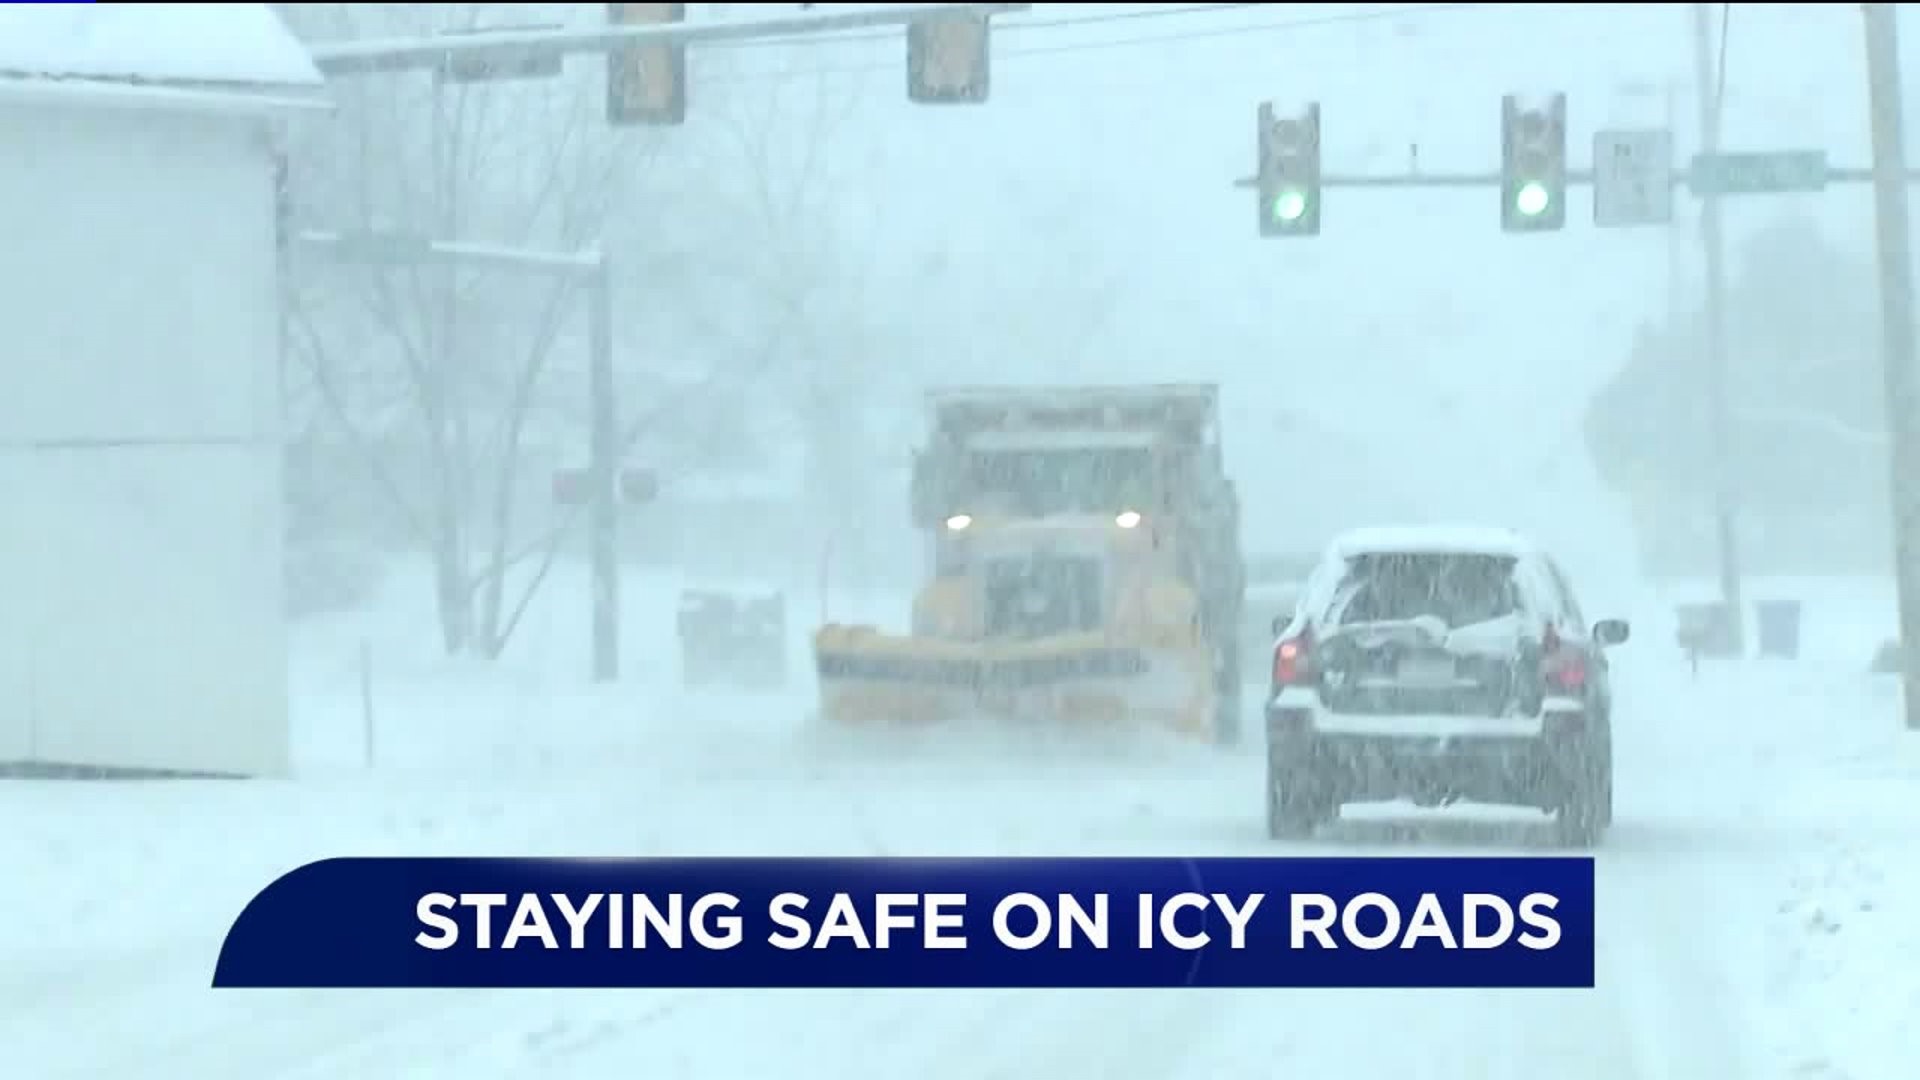 Staying Safe on Icy Roads in Wayne County